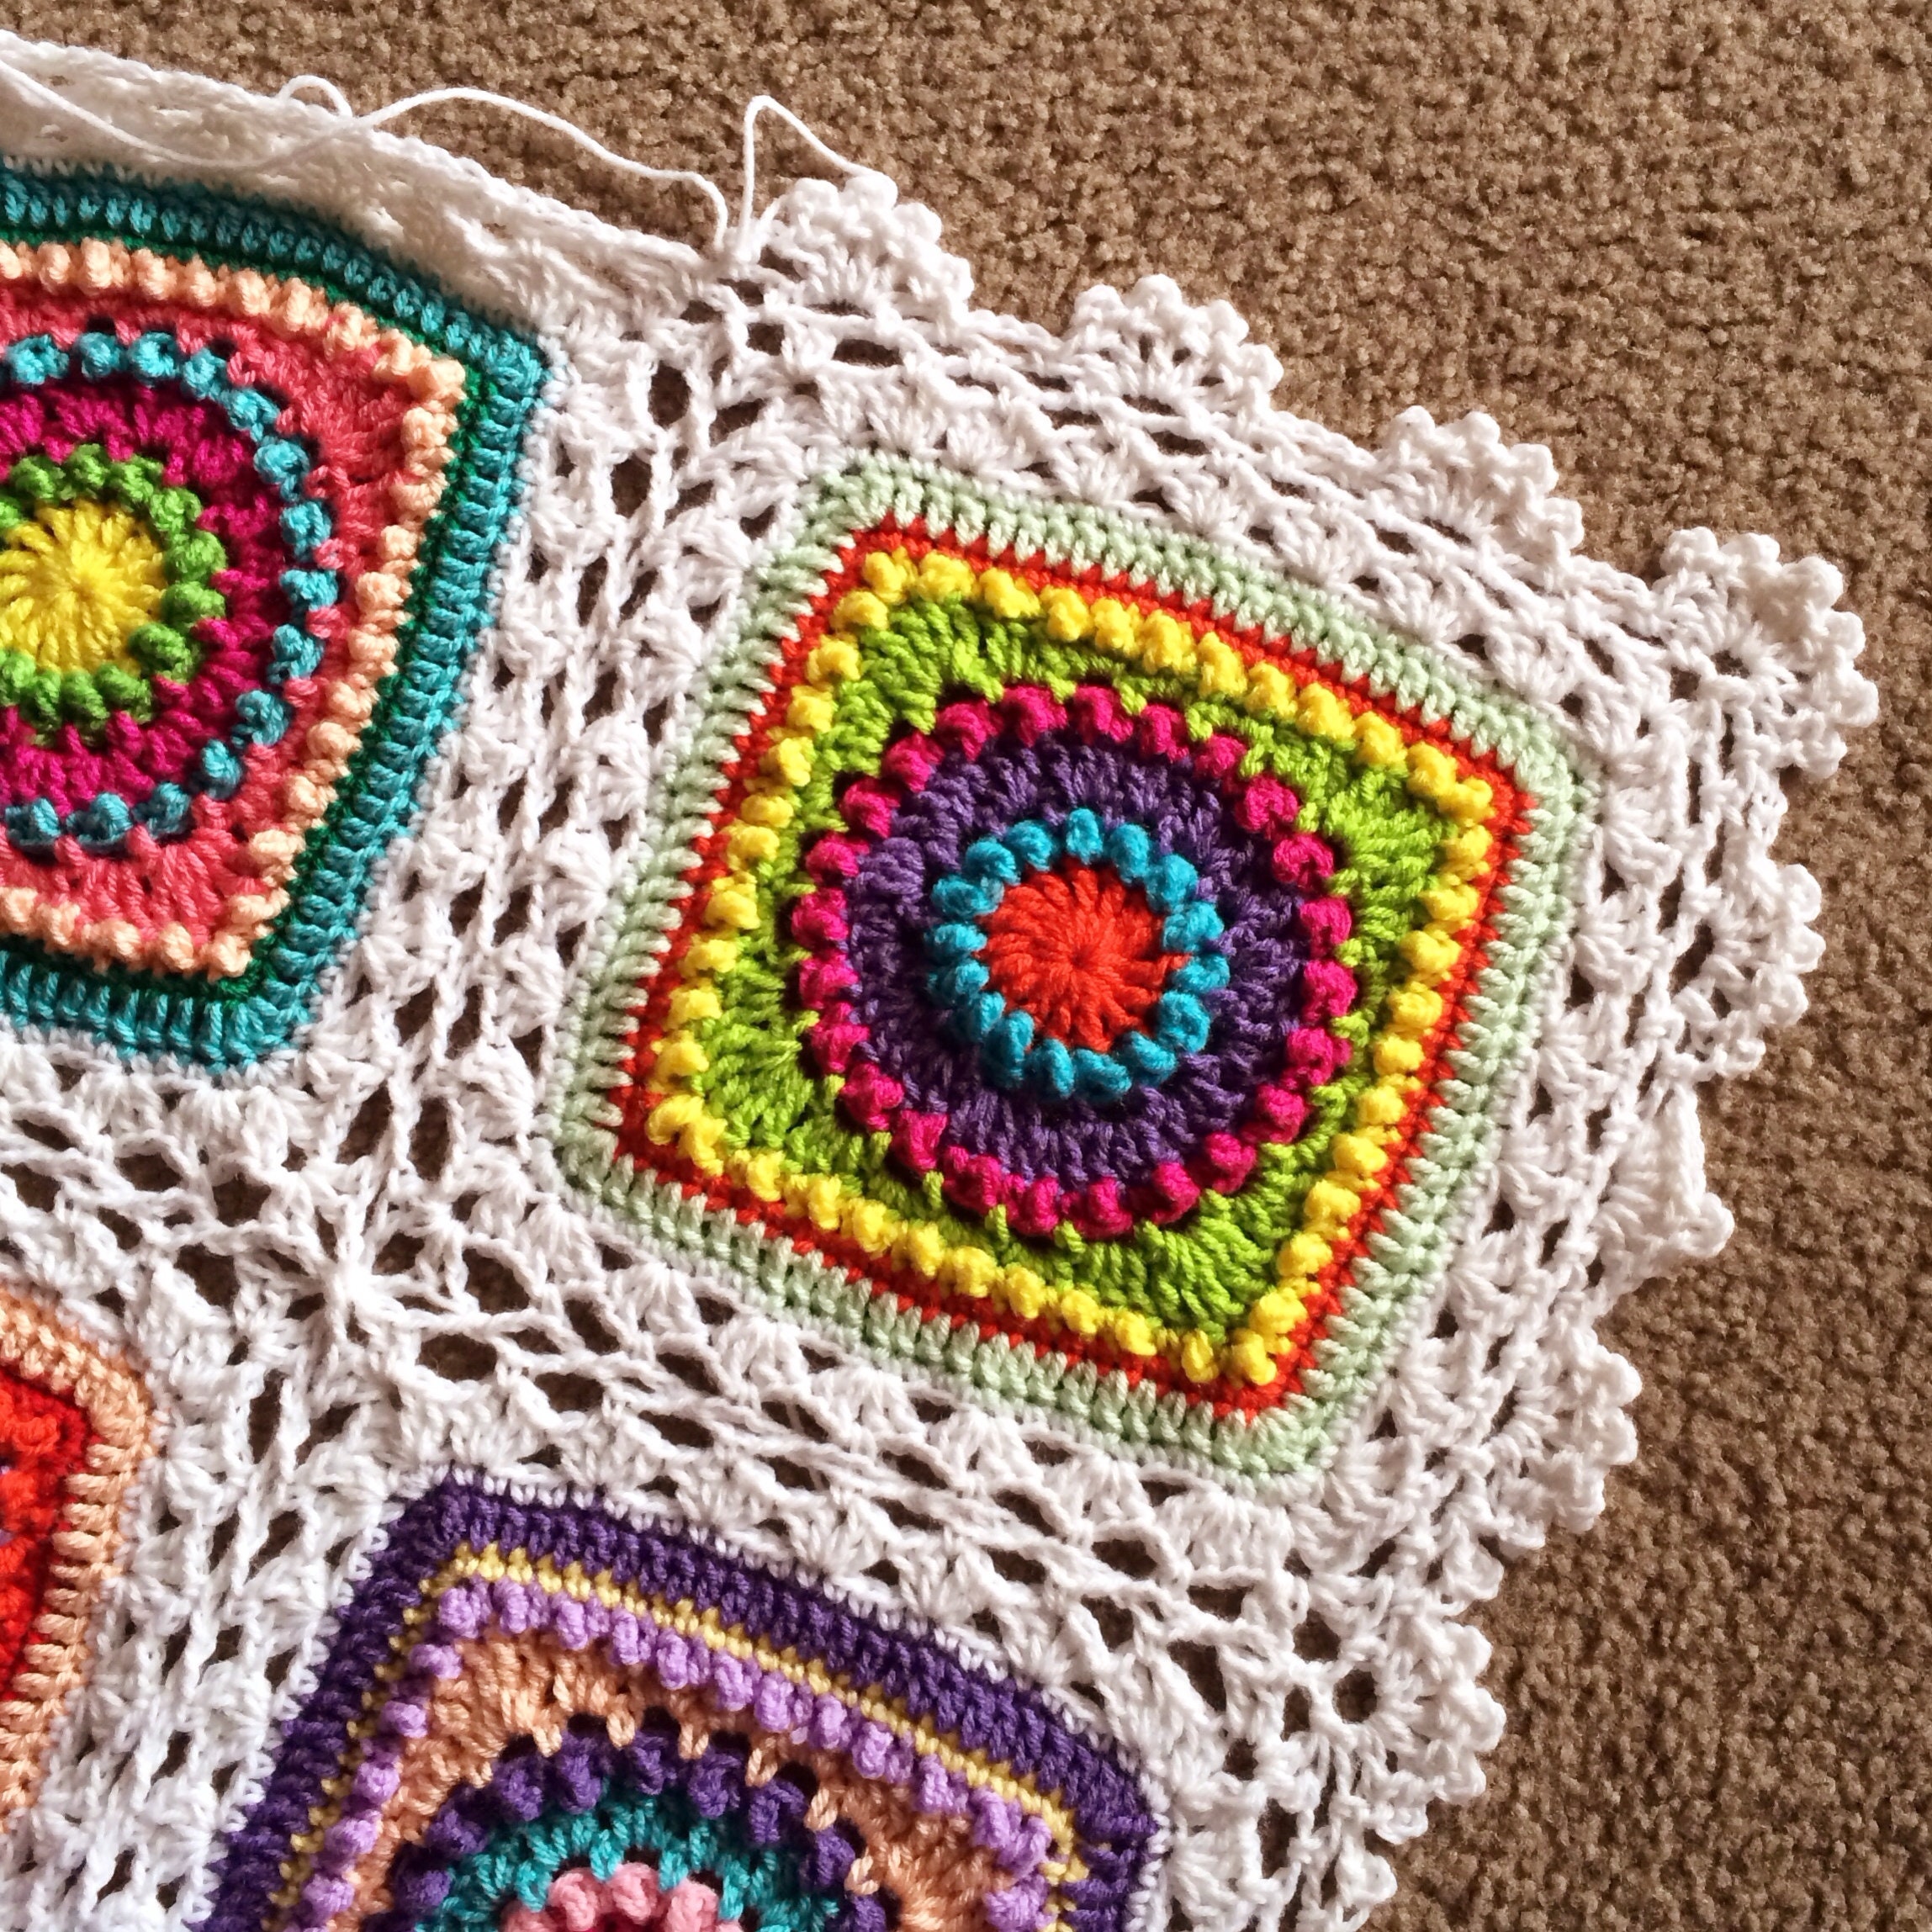 Joining granny squares — Picking Up Stitches